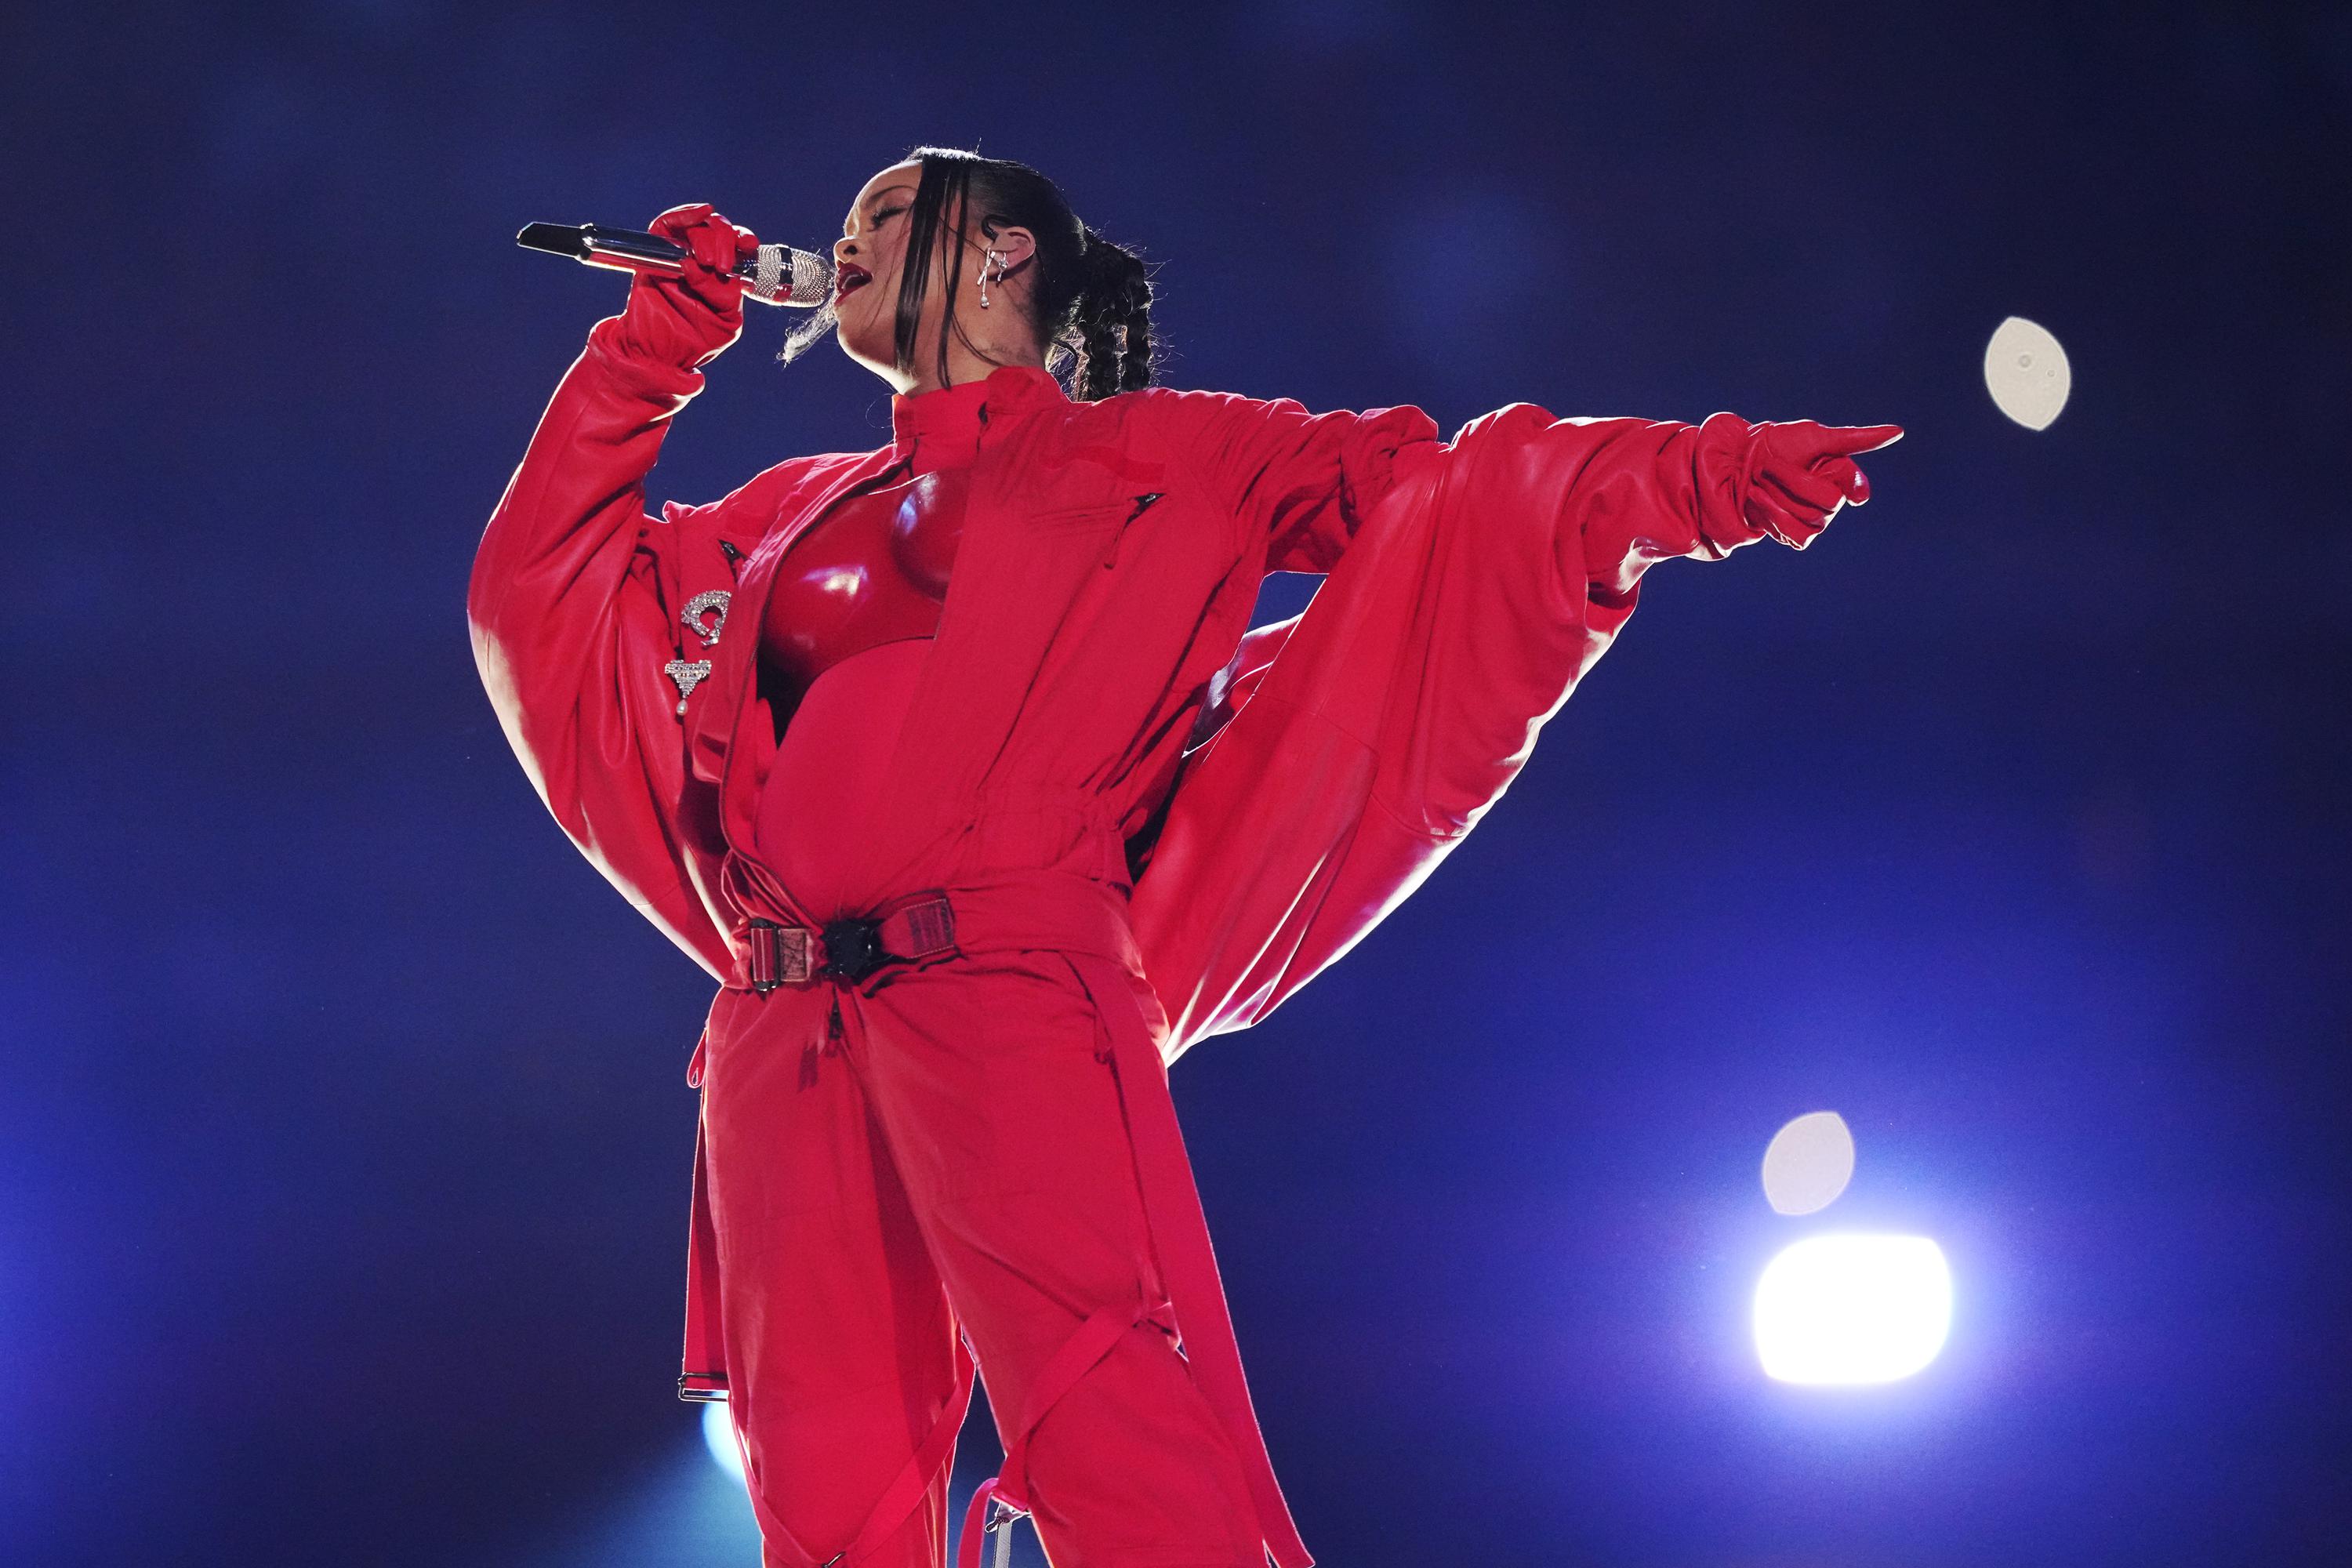 Rihanna will sing 'Lift Me Up' at the Oscars next month AP News